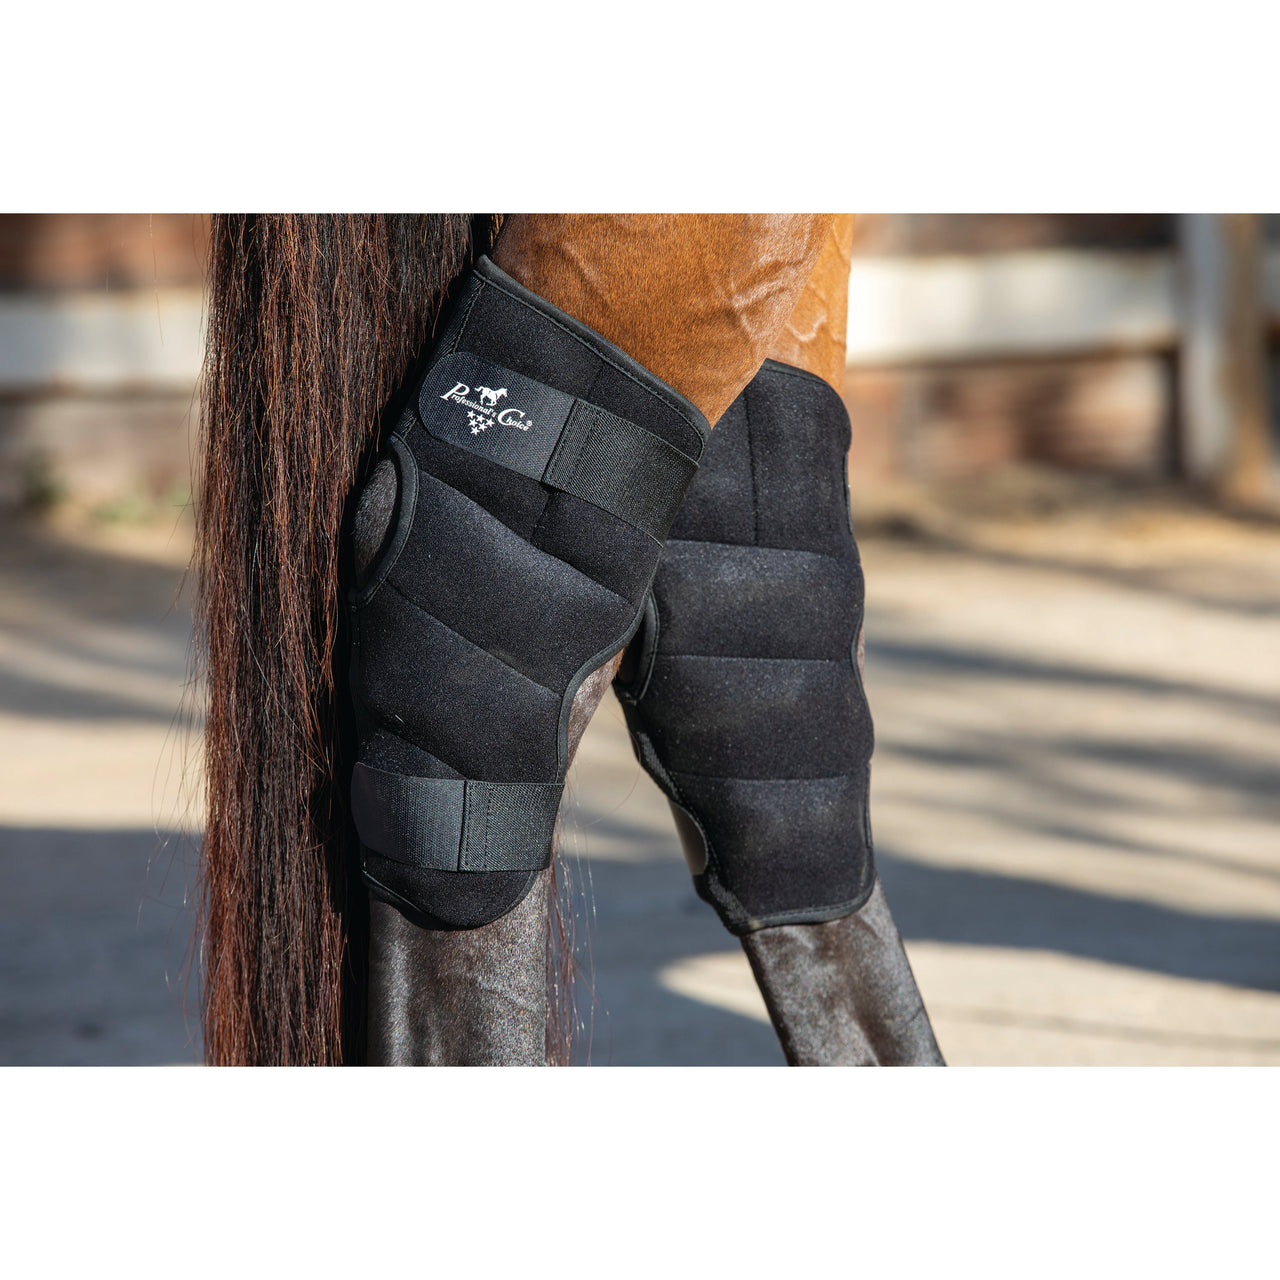 Professional's Choice Hock Ice Boot - Standard